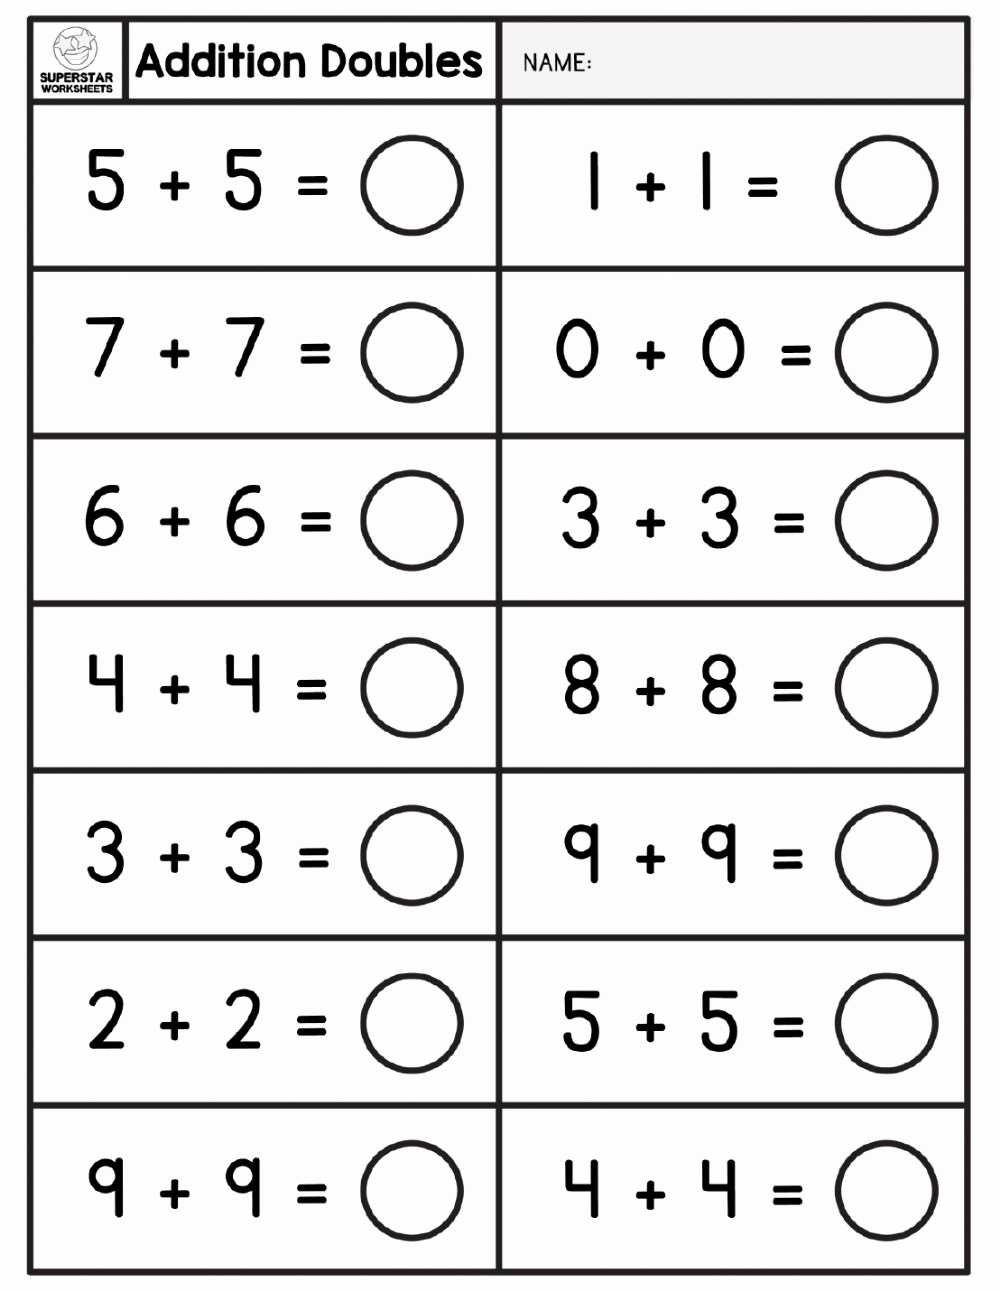 Doubles Addition Worksheet Best Of 30 Doubles Addition Worksheet